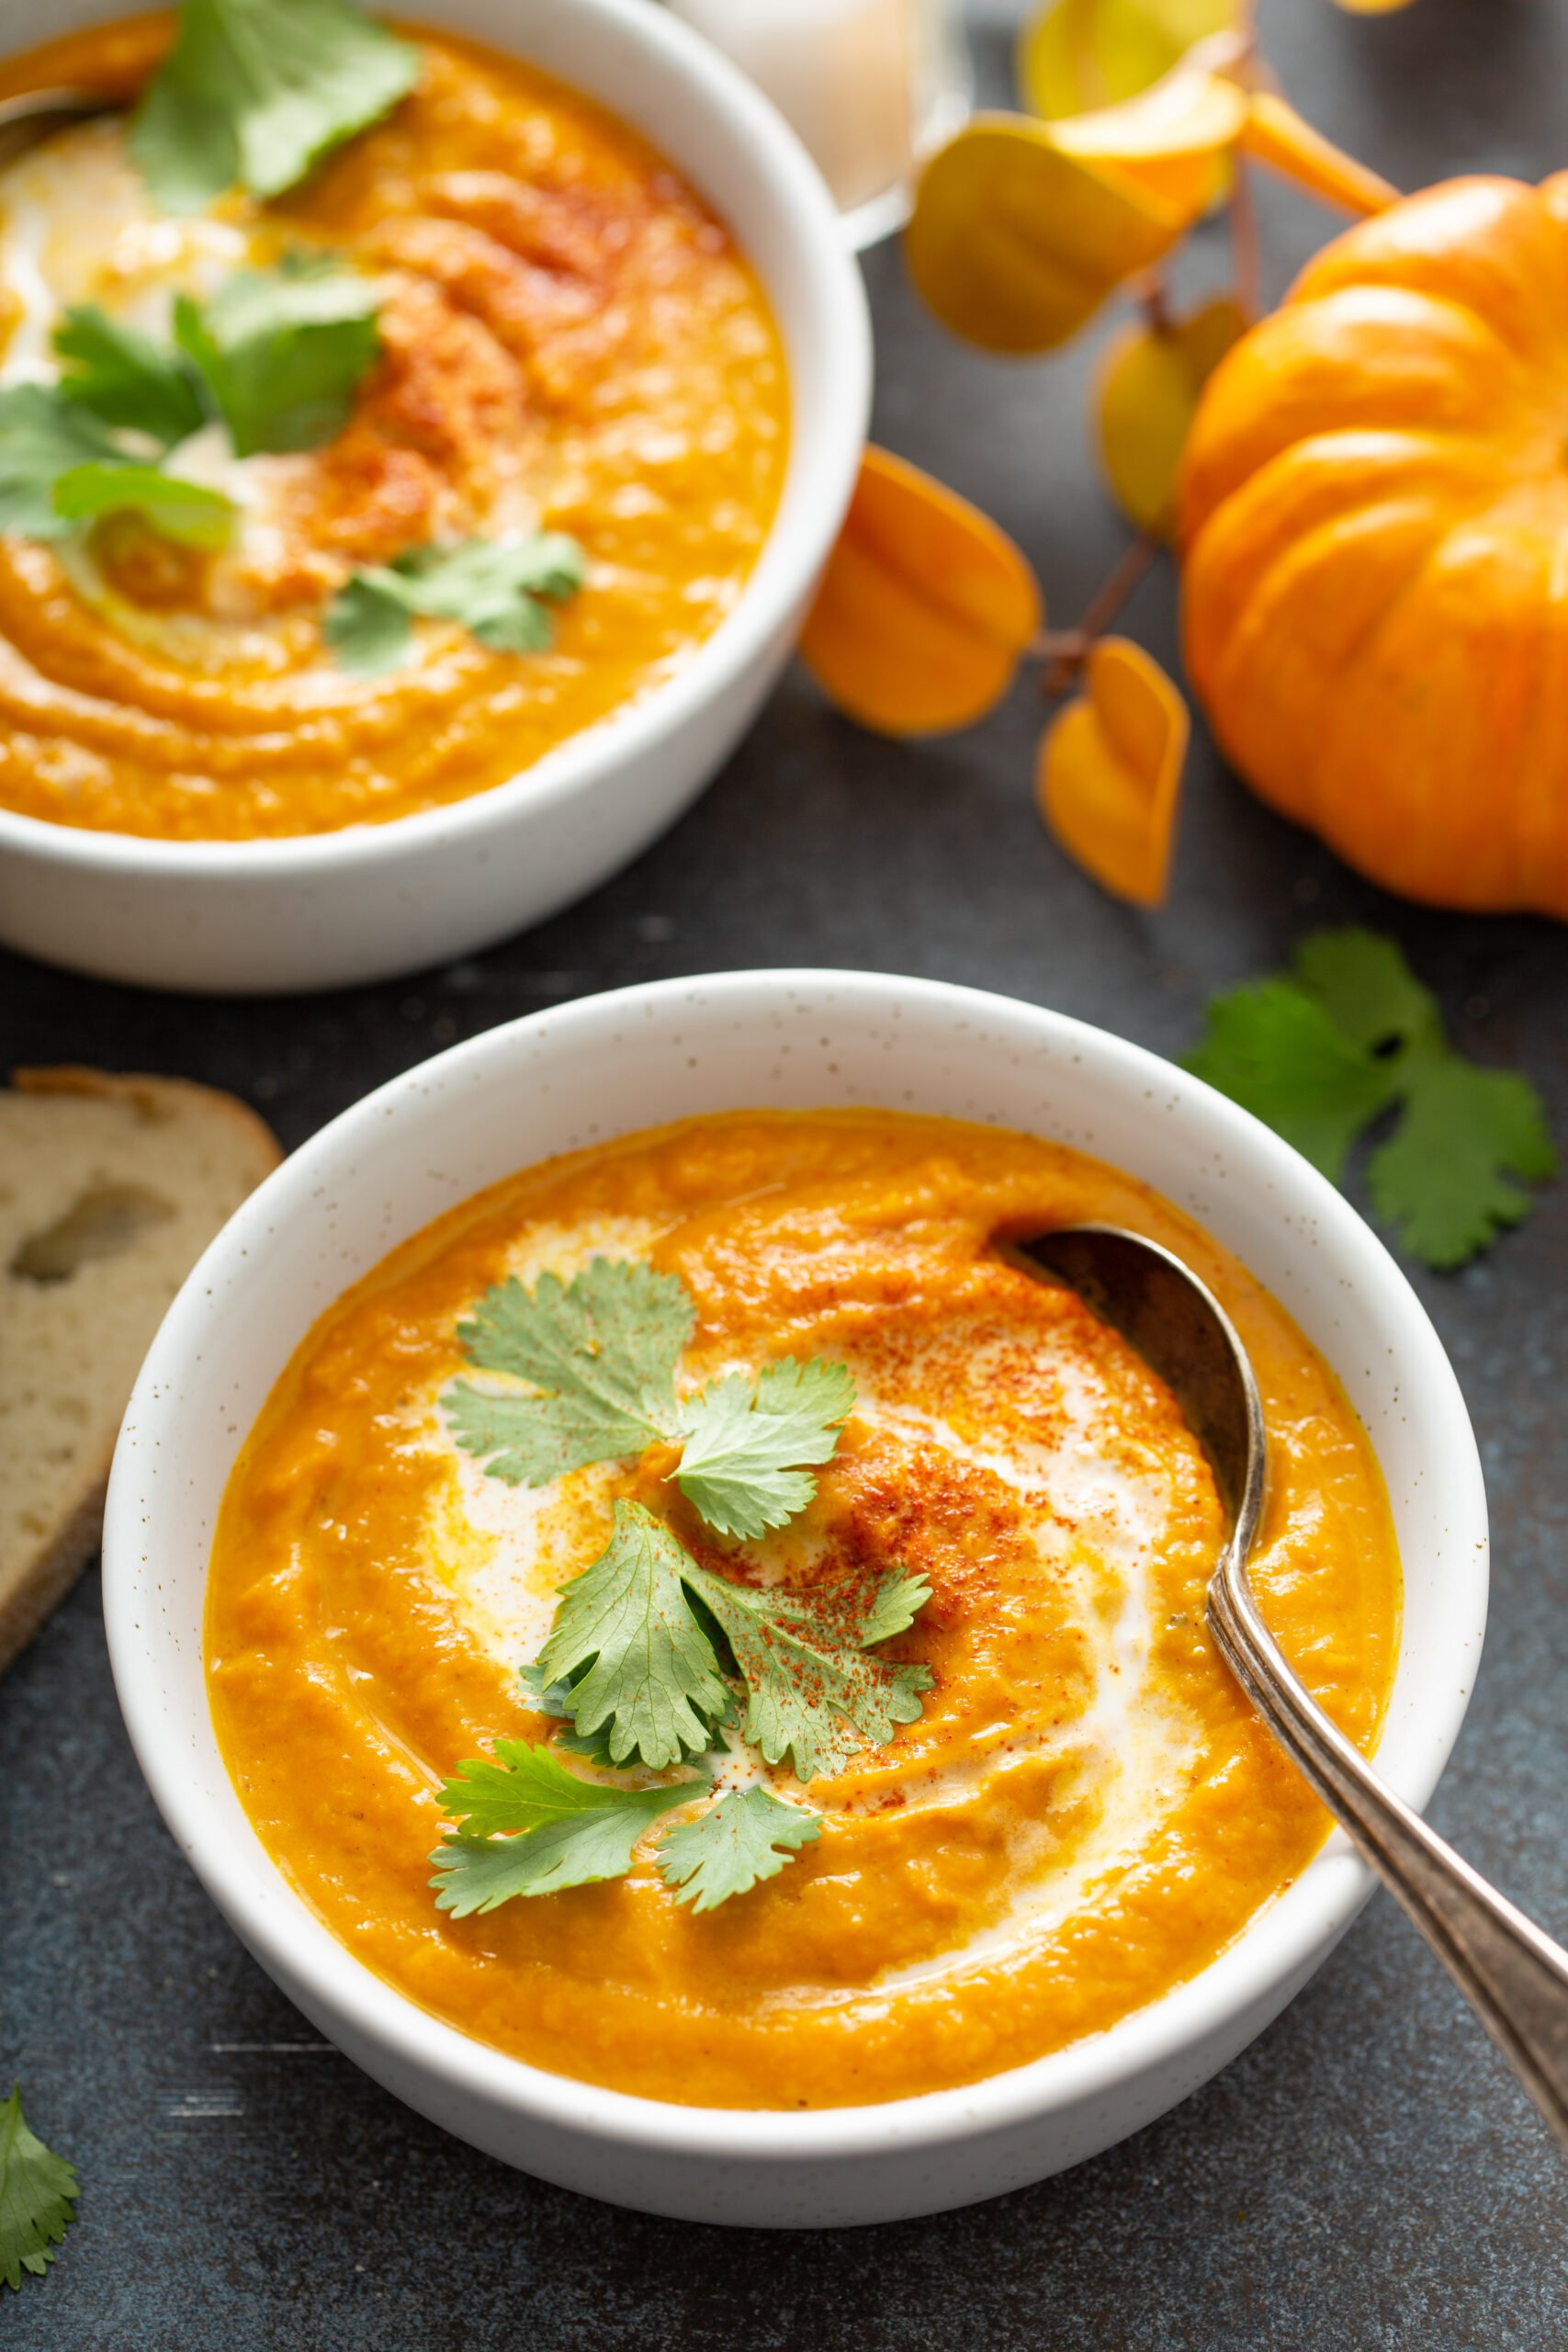 http://www.nikkisplate.com/wp-content/uploads/2022/07/Thai-Pumpkin-and-Carrot-Soup-Recipe-4-scaled.jpg